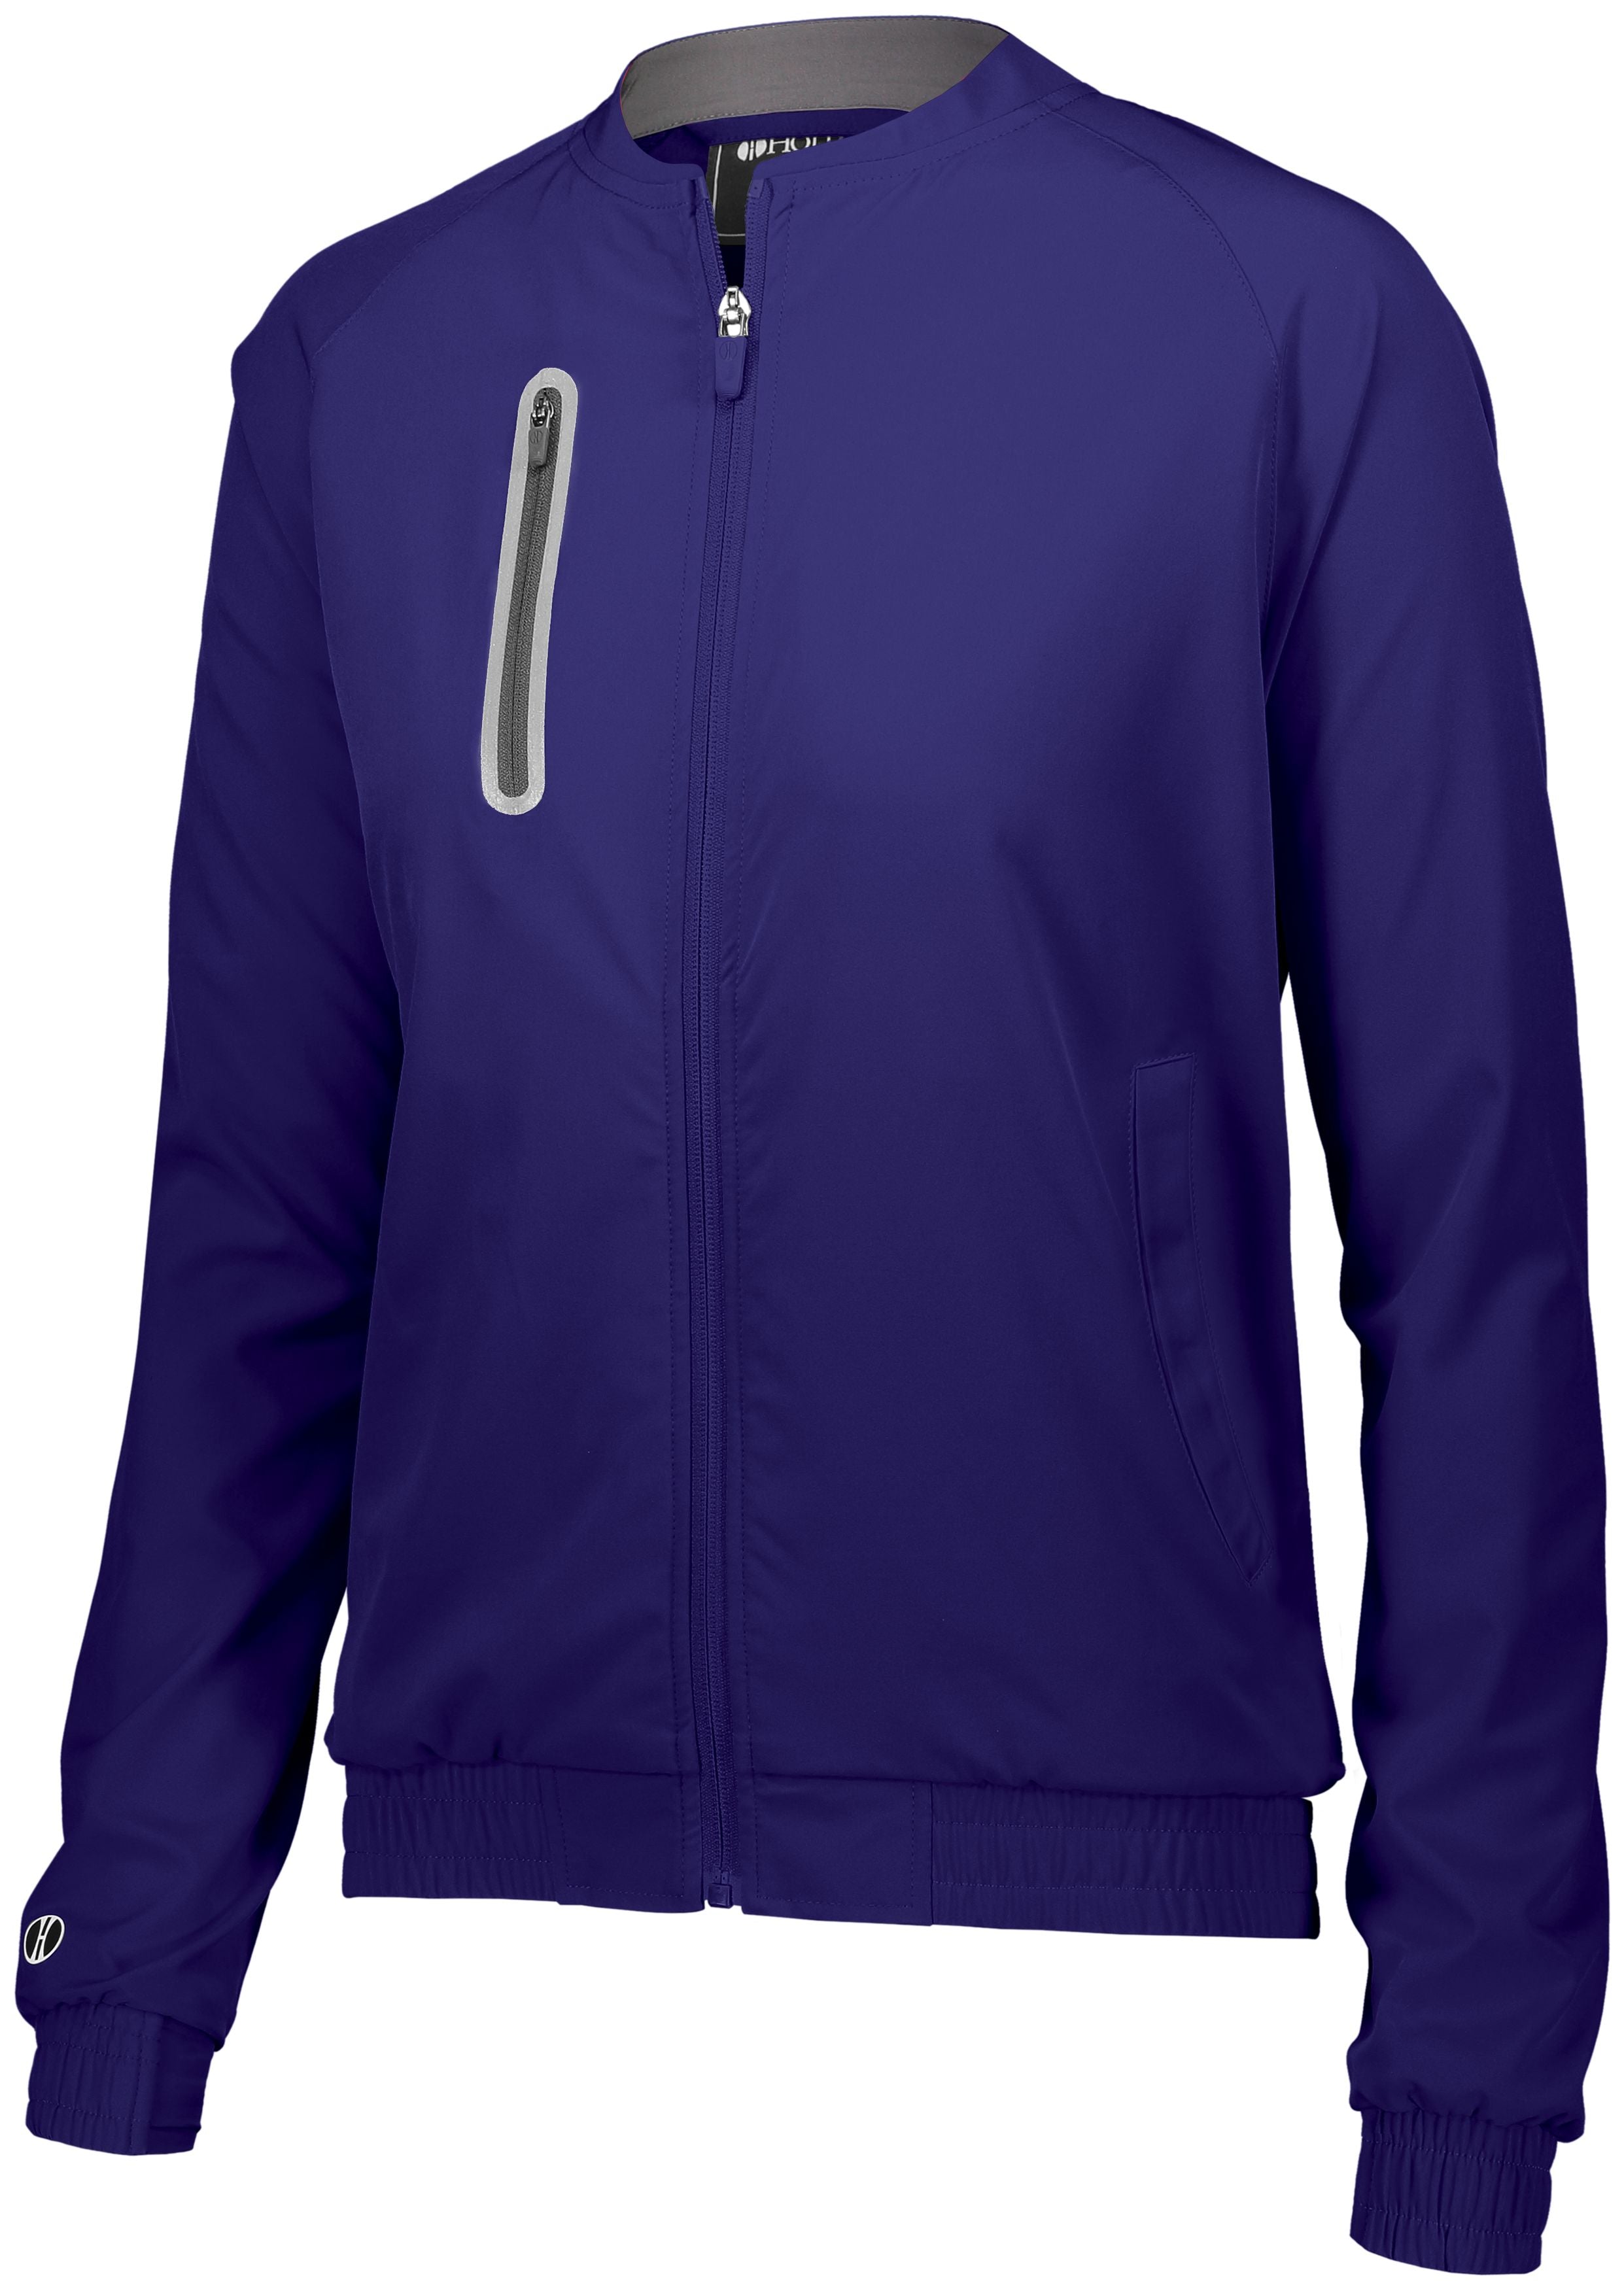 Holloway Ladies Weld Jacket in Purple  -Part of the Ladies, Ladies-Jacket, Holloway, Outerwear, Weld-Collection product lines at KanaleyCreations.com